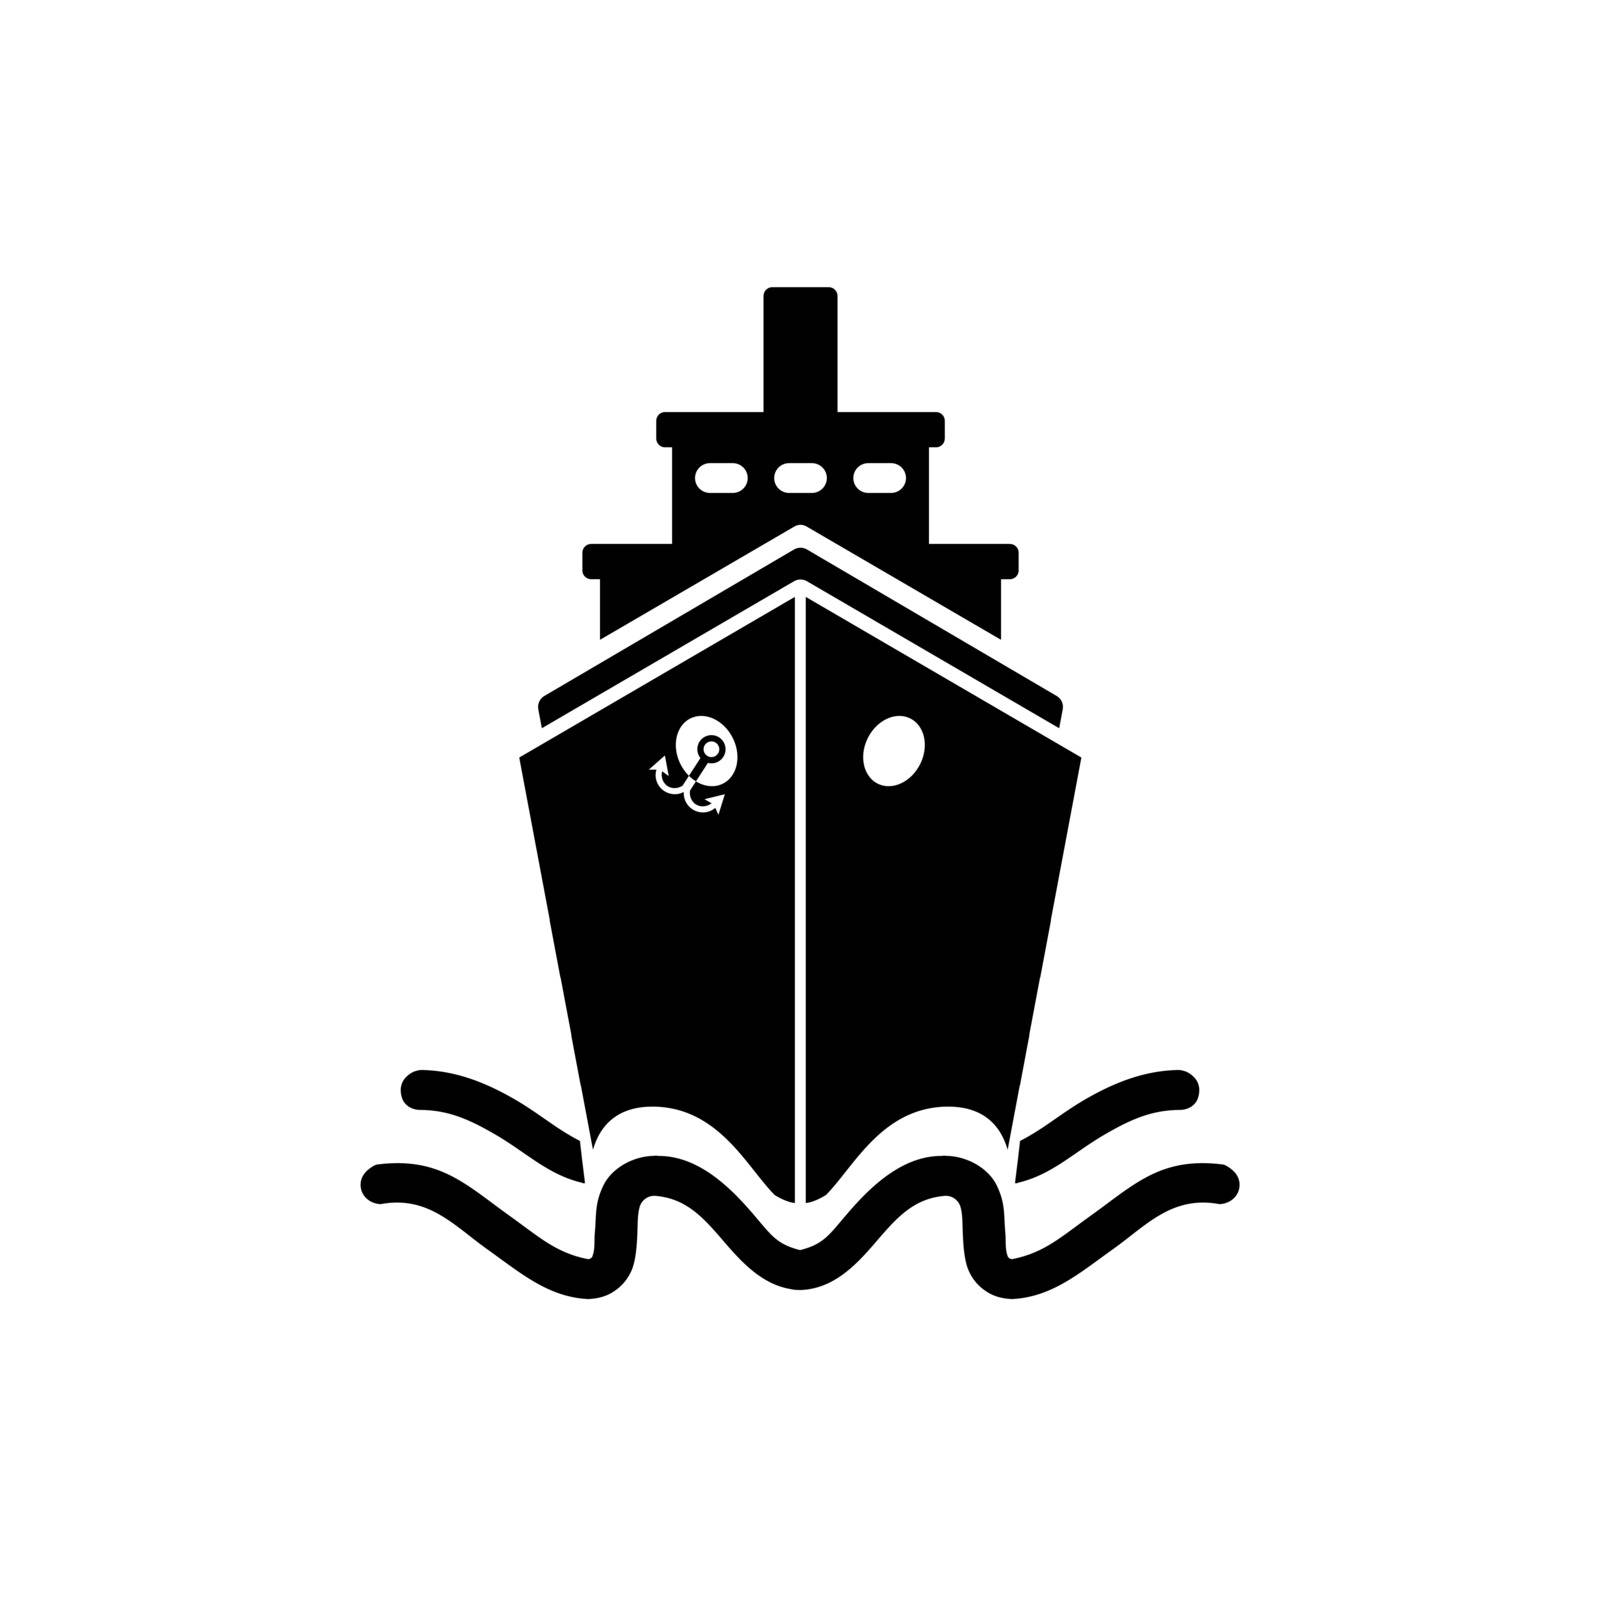 Ship icon in flat style. Black pictogram isolated on white background. Vector illustration. Ship symbol for website design, mobile application, ui.